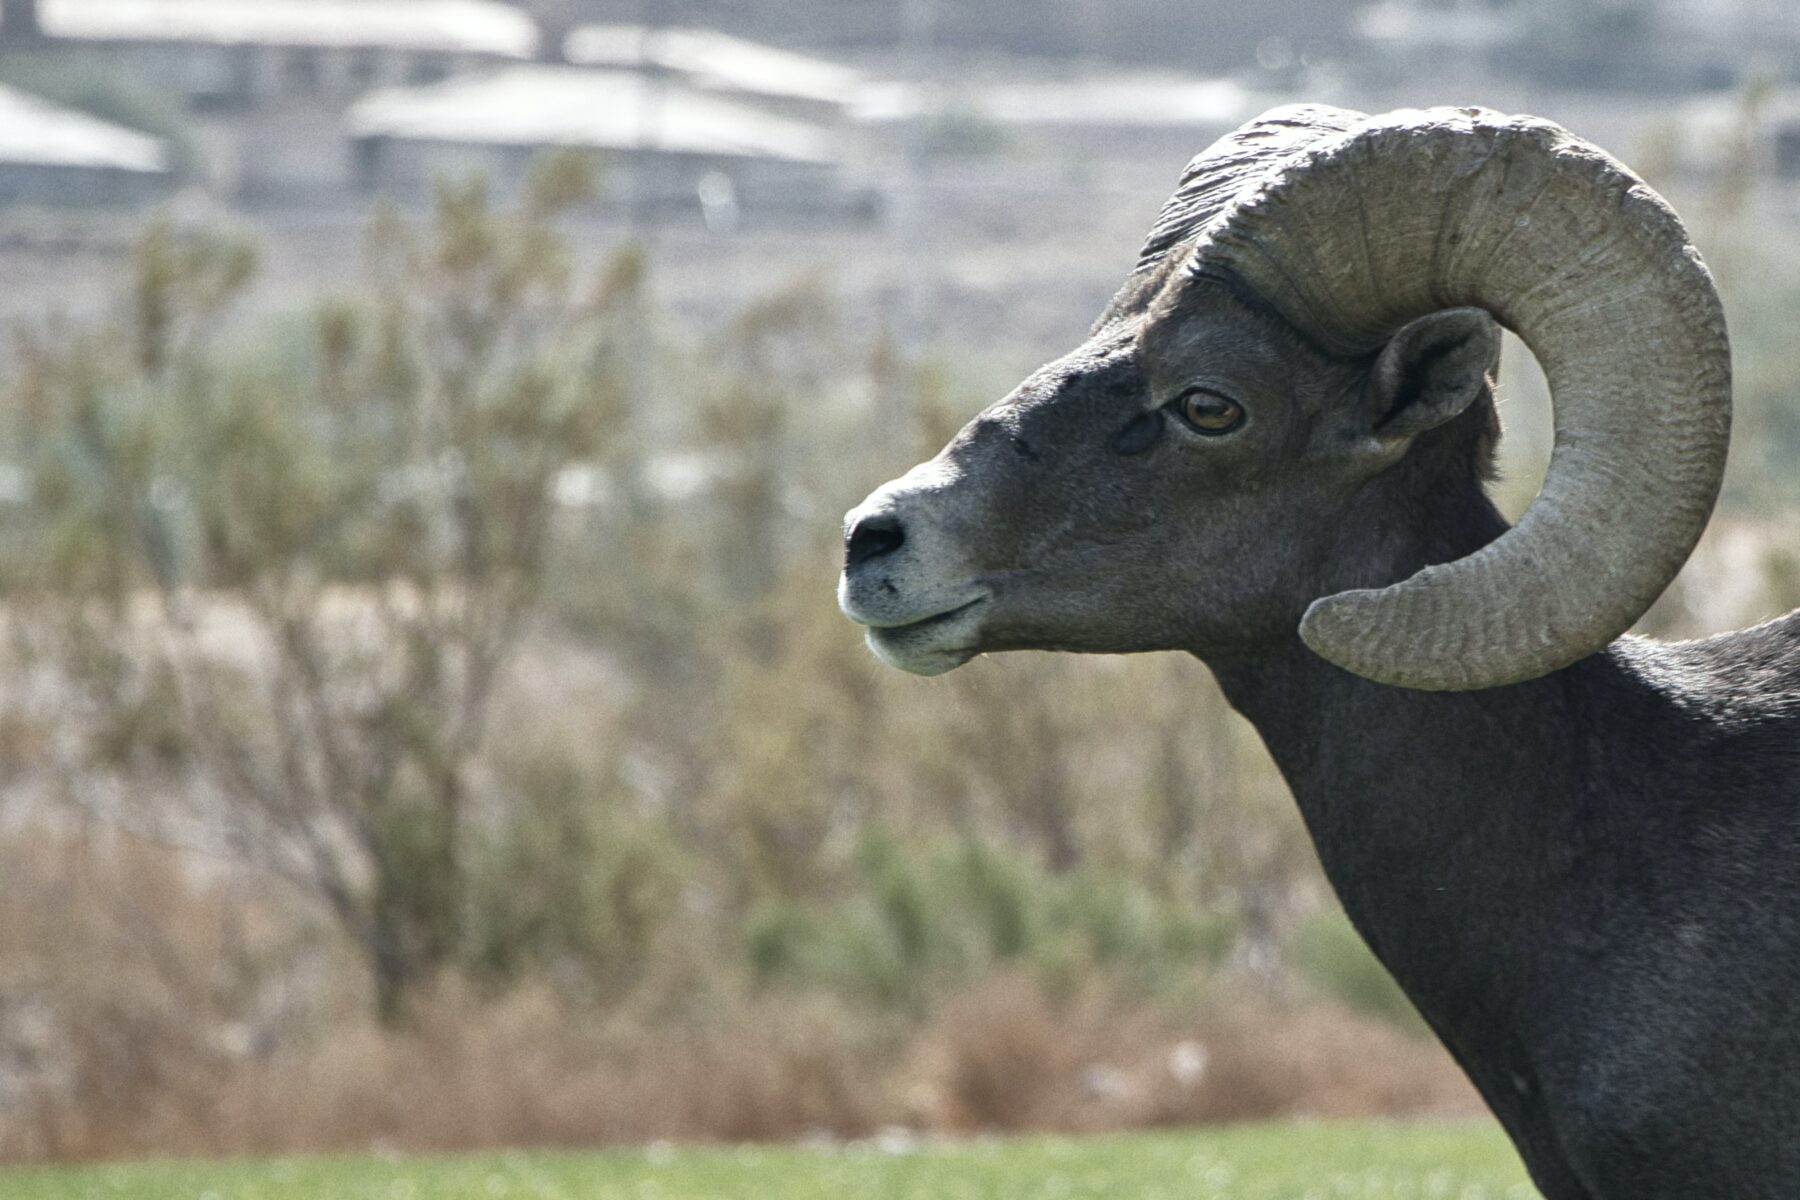 Domestic Sheep Grazing Halted at Coller State Wildlife Area